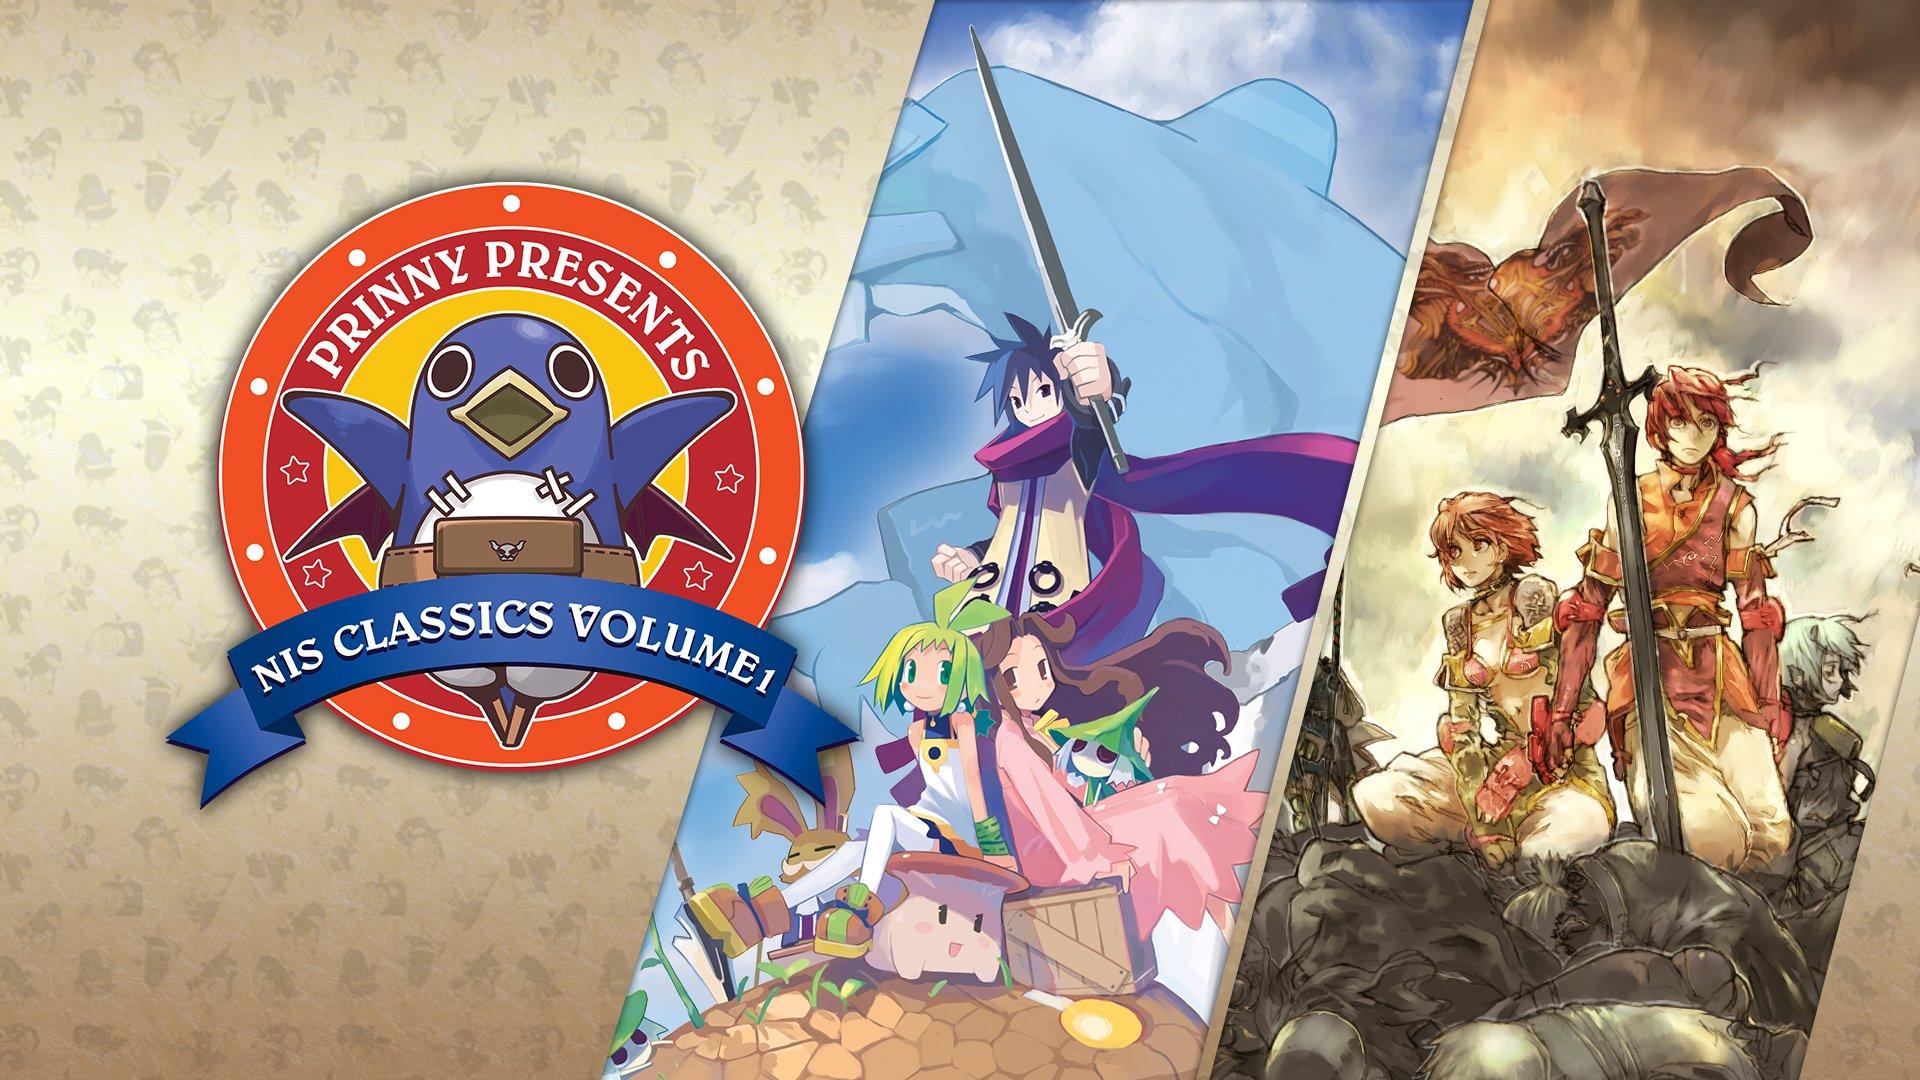 Prinny Presents NIS Classics Volume 1: Phantom Brave: The Hermuda Triangle Remastered and Soul Nomad and the World Eaters - Nintendo Switch